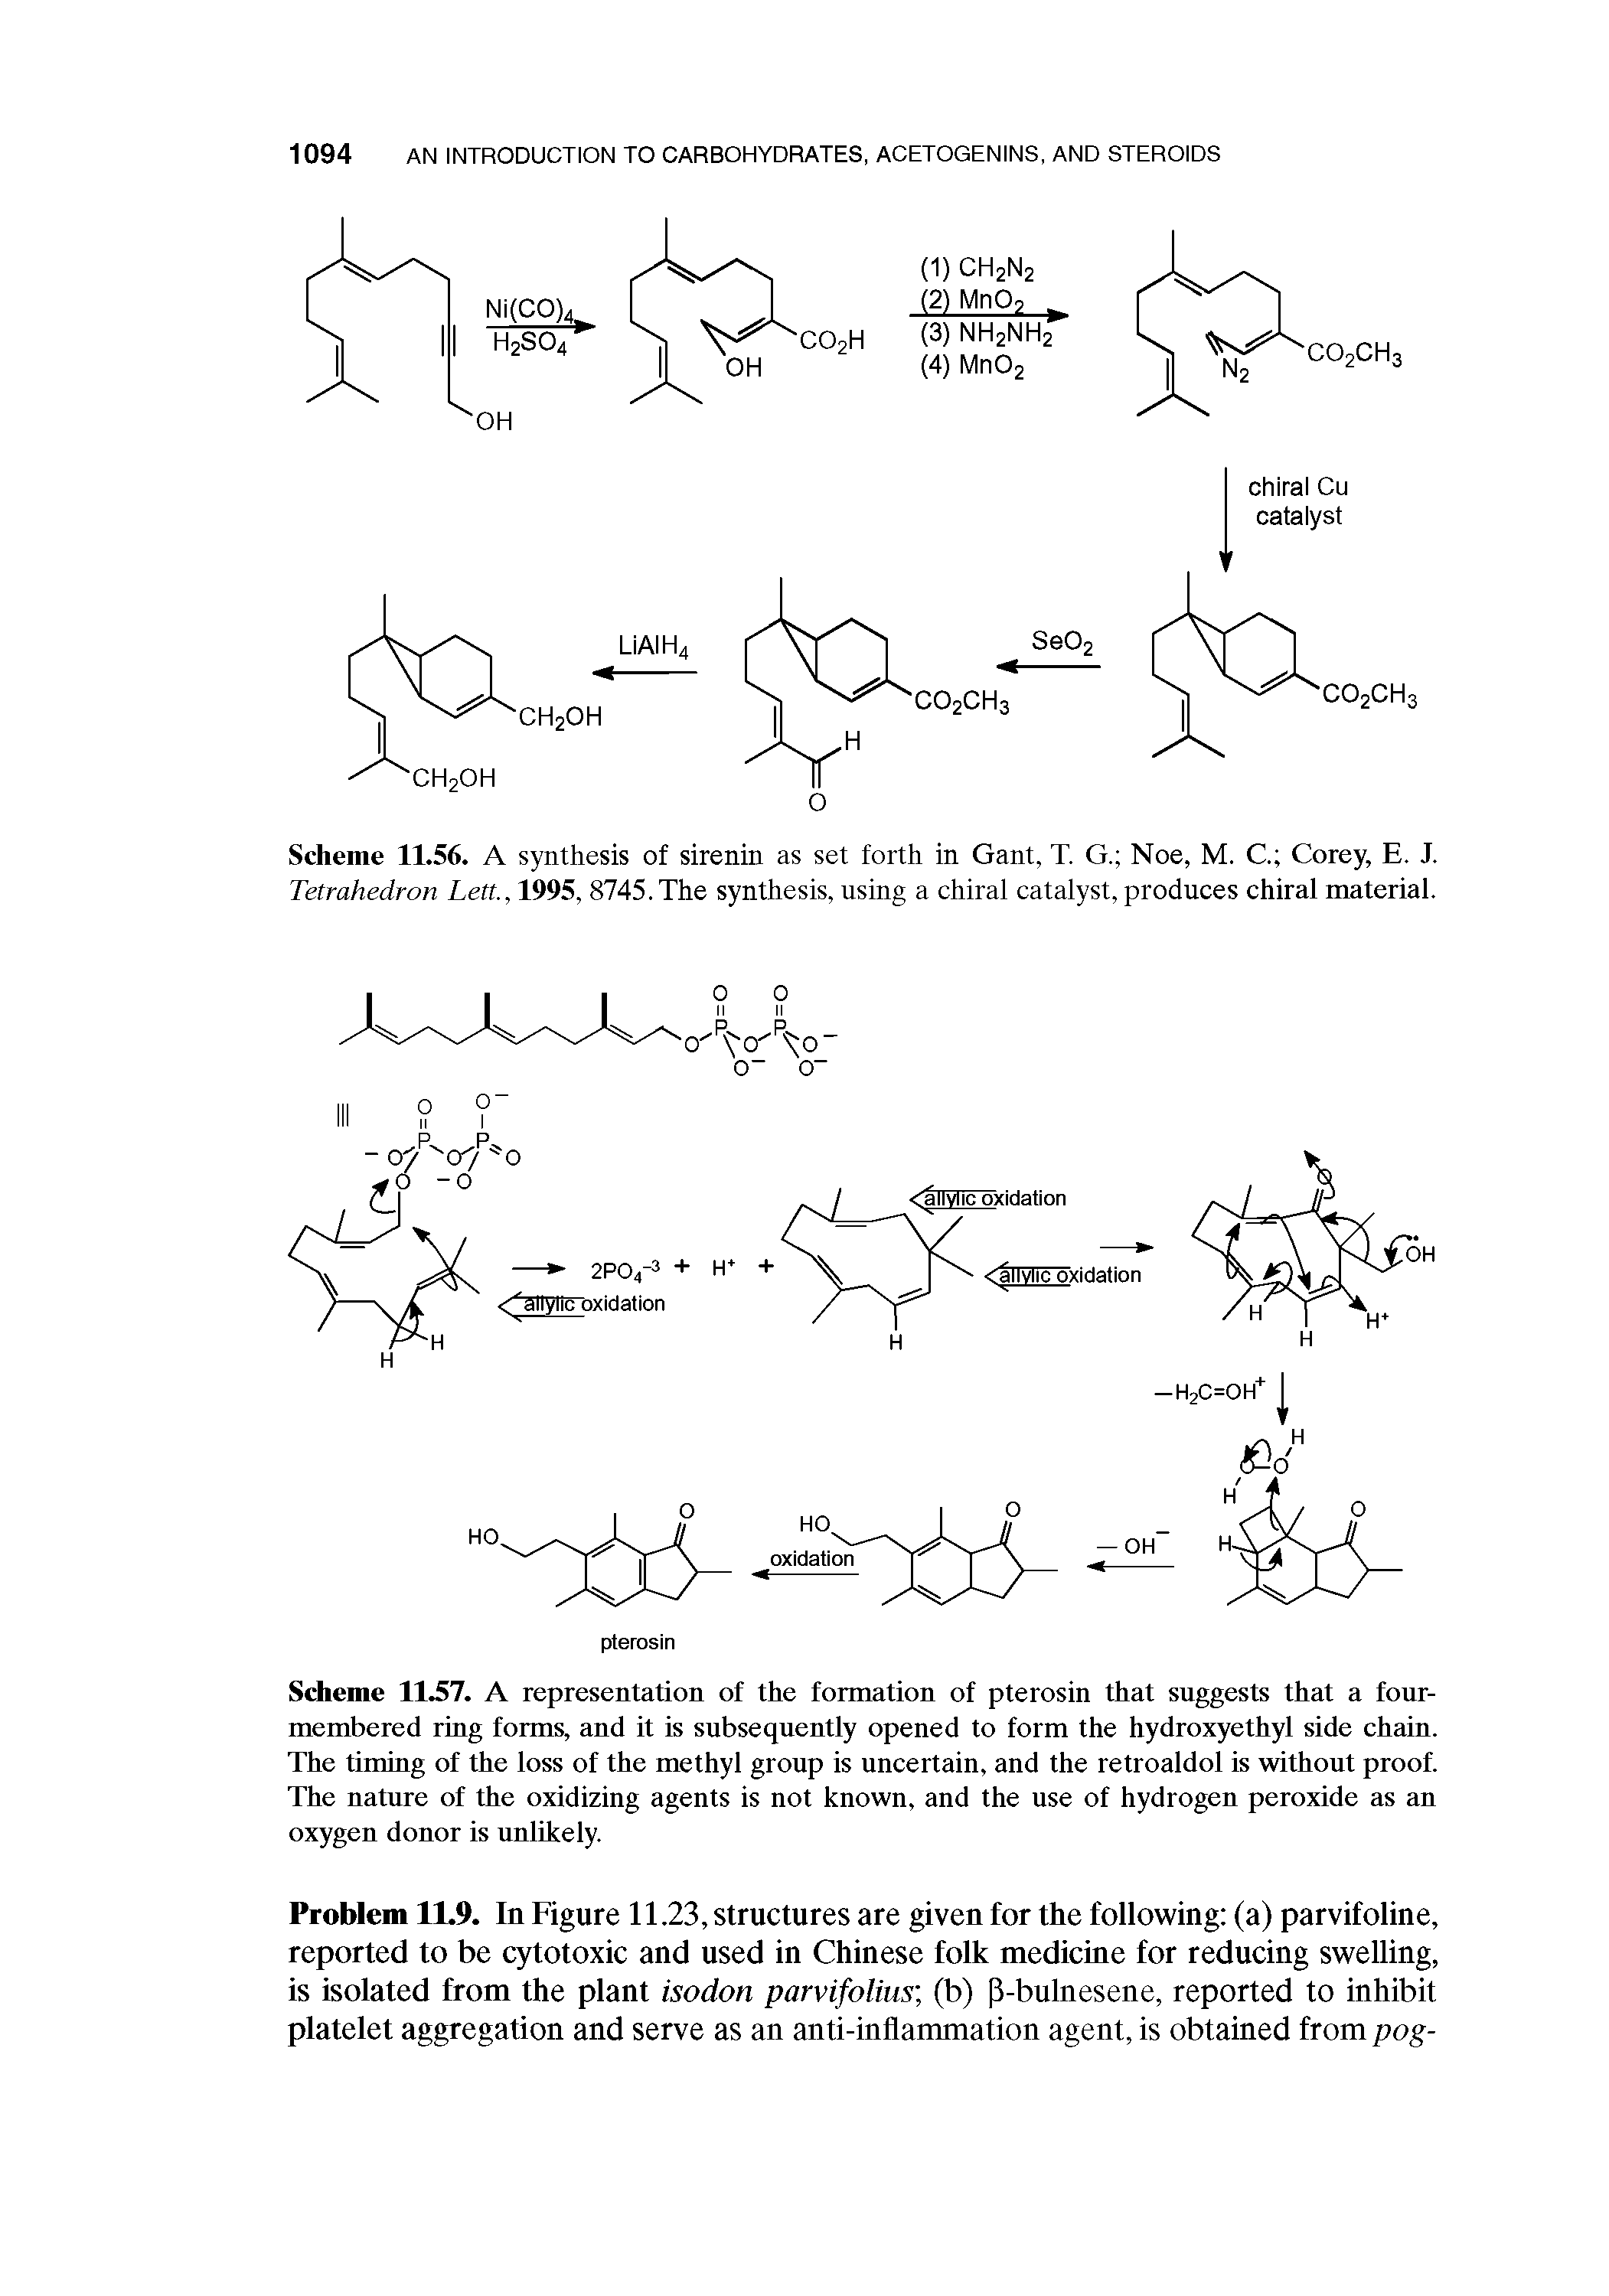 Scheme 11.57. A representation of the formation of pterosin that snggests that a four-membered ring forms, and it is subseqnently opened to form the hydroxyethyl side chain. The timing of the loss of the methyl group is uncertain, and the retroaldol is without proof. The nature of the oxidizing agents is not known, and the use of hydrogen peroxide as an oxygen donor is unlikely.